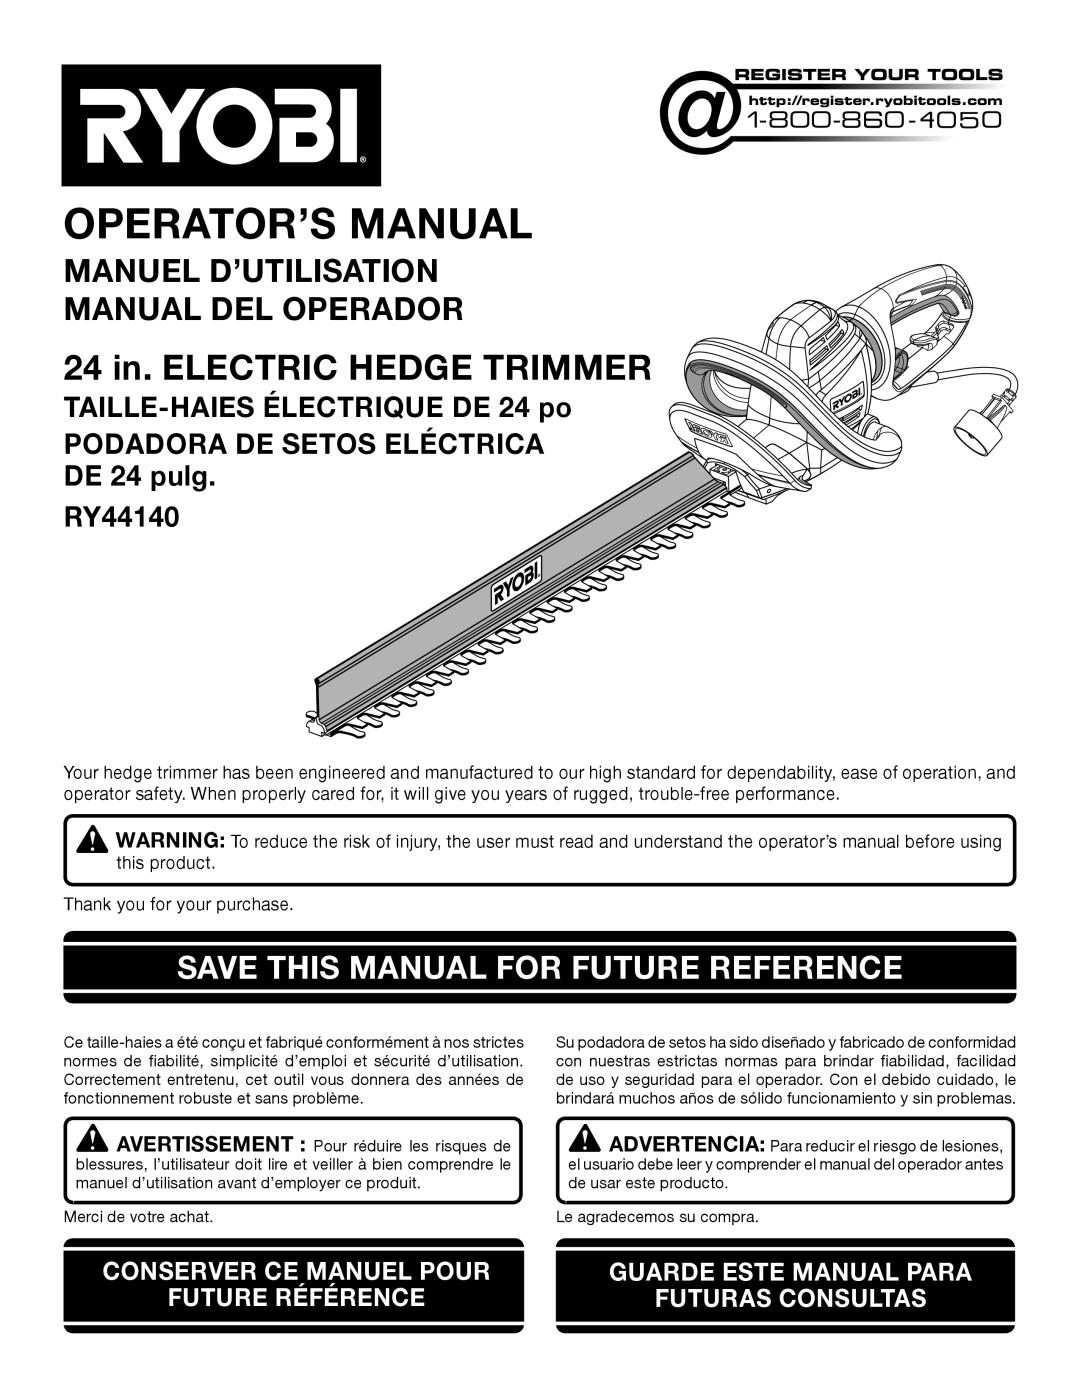 Ryobi manuel dutilisation 24 in. ELECTRIC HEDGE TRIMMER, Save This Manual For Future Reference, DE 24 pulg RY44140 